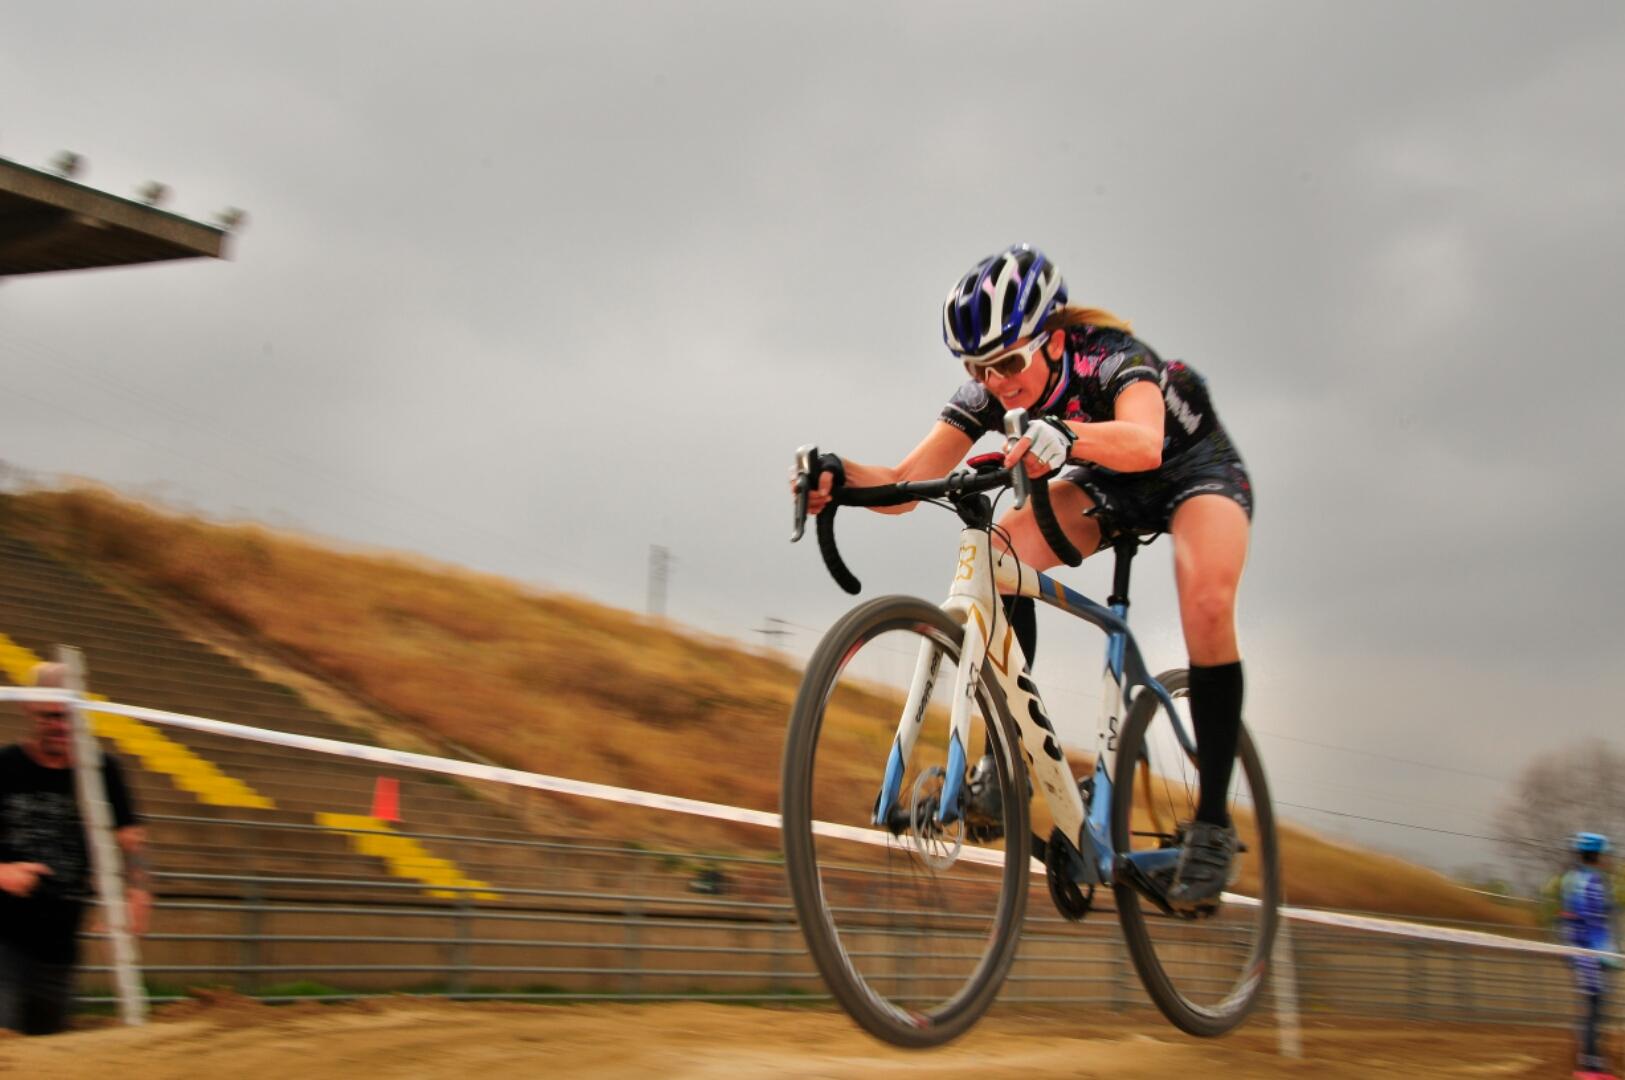 Jen tearing up the cross course